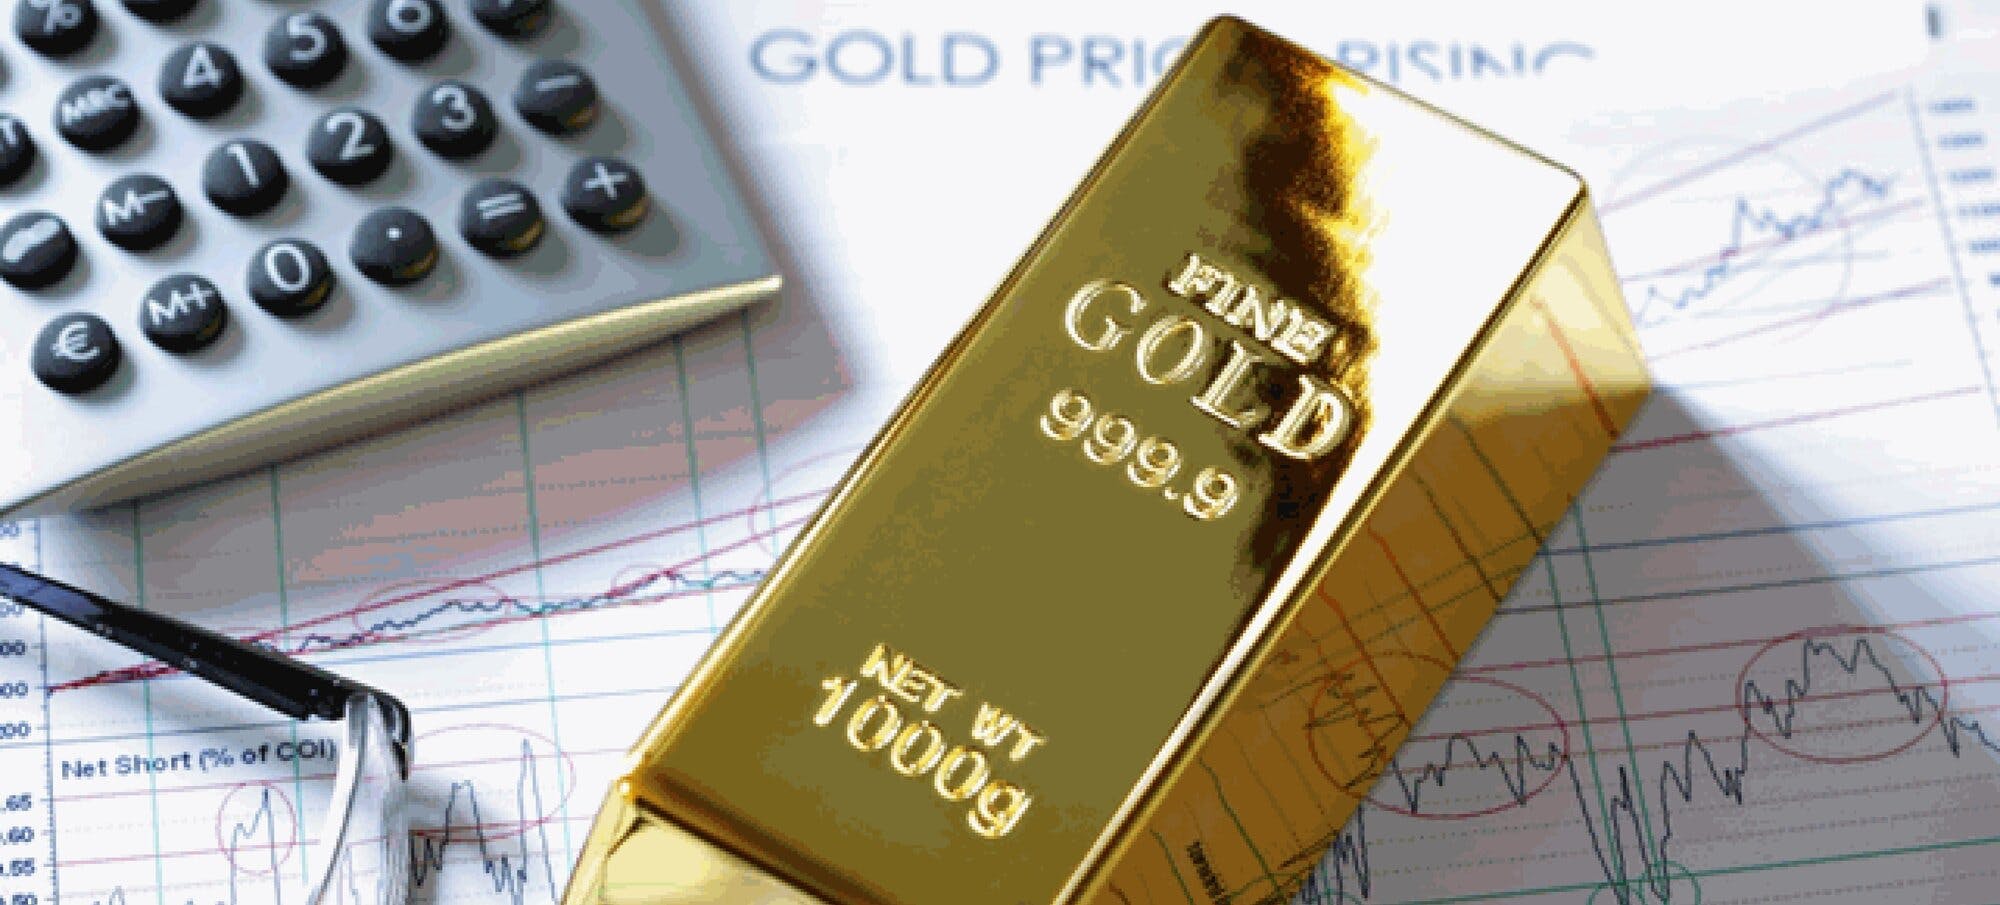 What are the factors affecting gold prices?